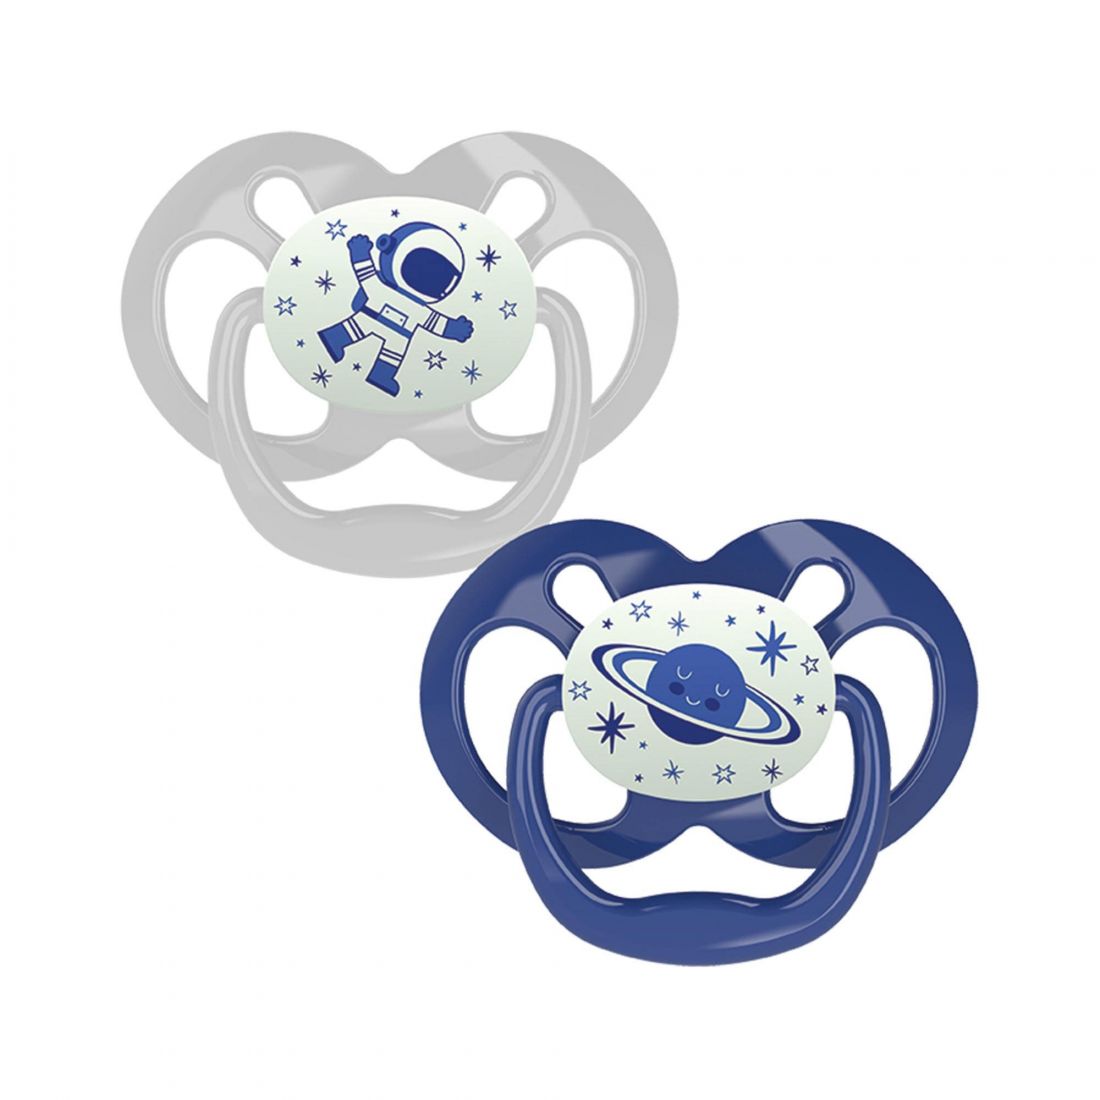 Dr.Brown's  Advantage Pacifier - Stage 2, Glow in the Dark - Blue 2-Pack 6-18Μ